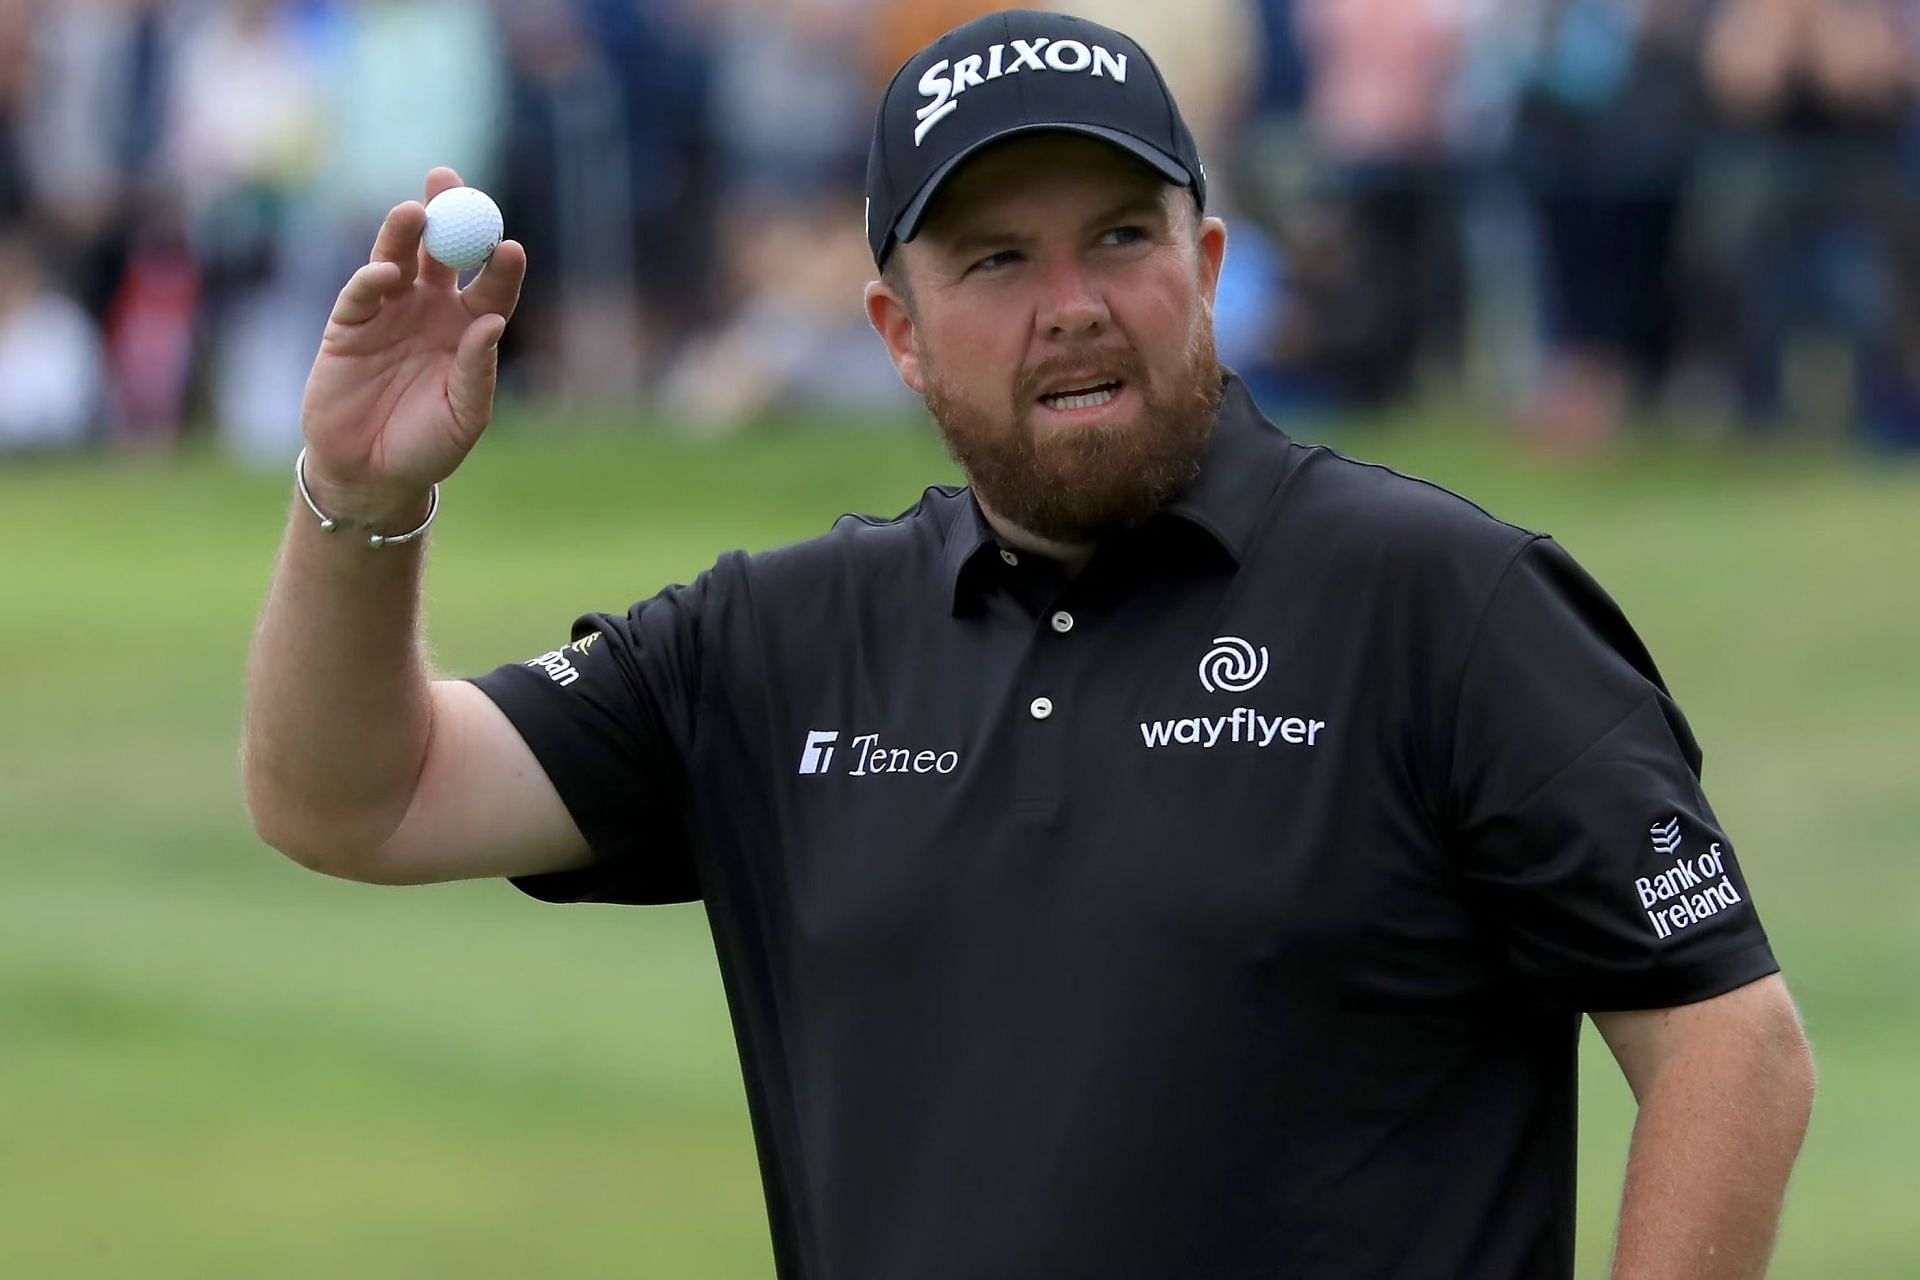 Shane Lowry faced the narrow defeat in the rain affected final day at Honda Classic 2022